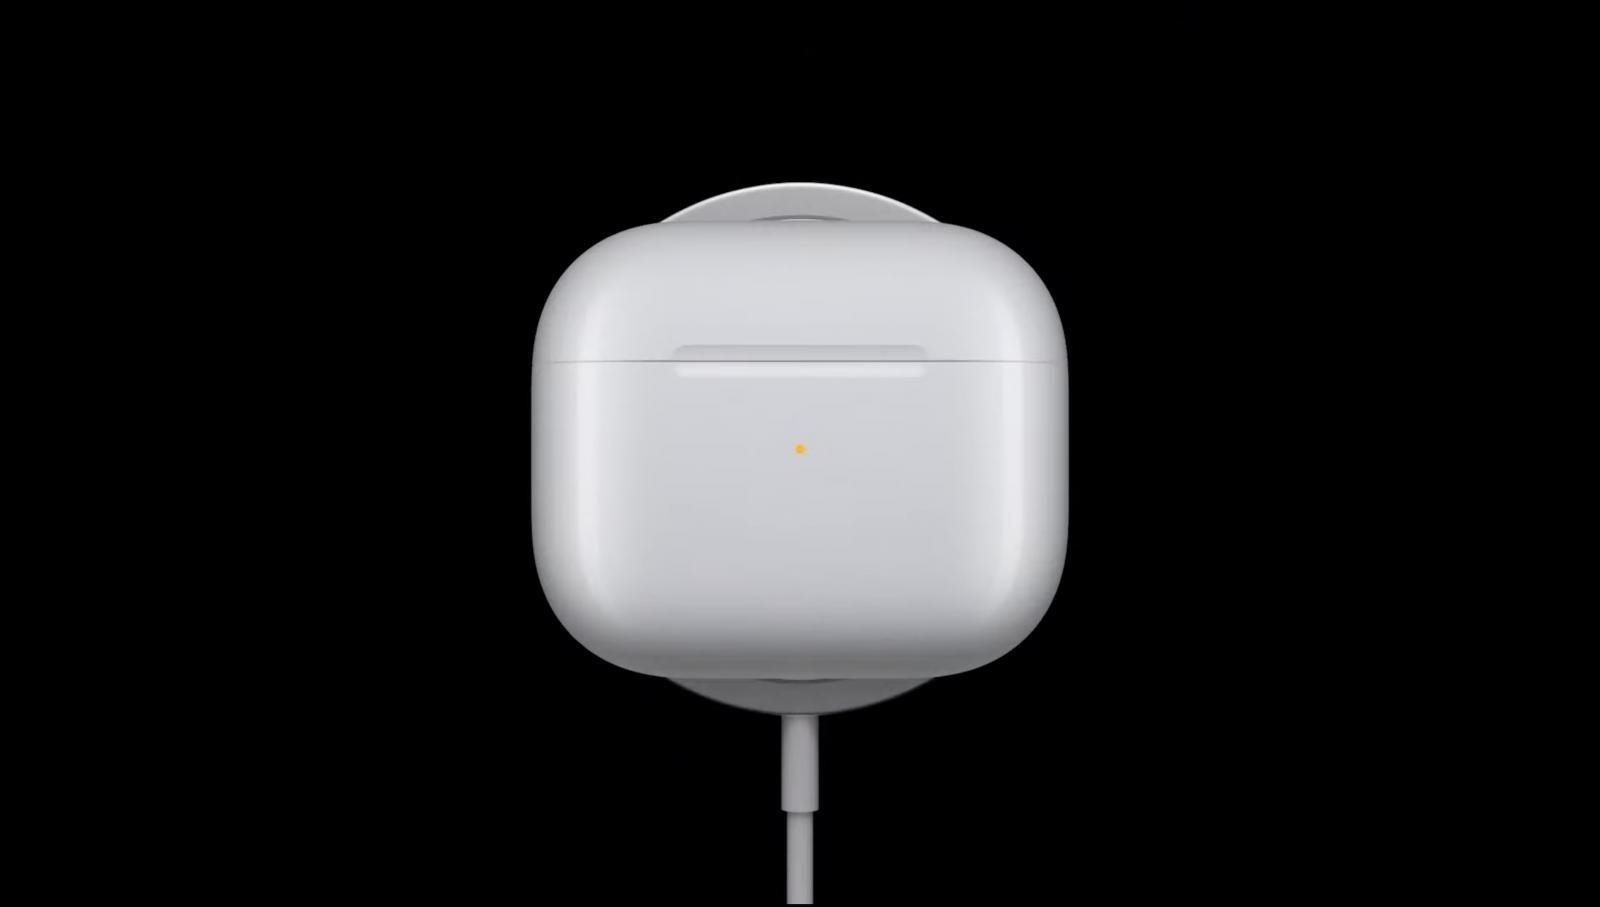 airpods 3 also feature magsafe charging